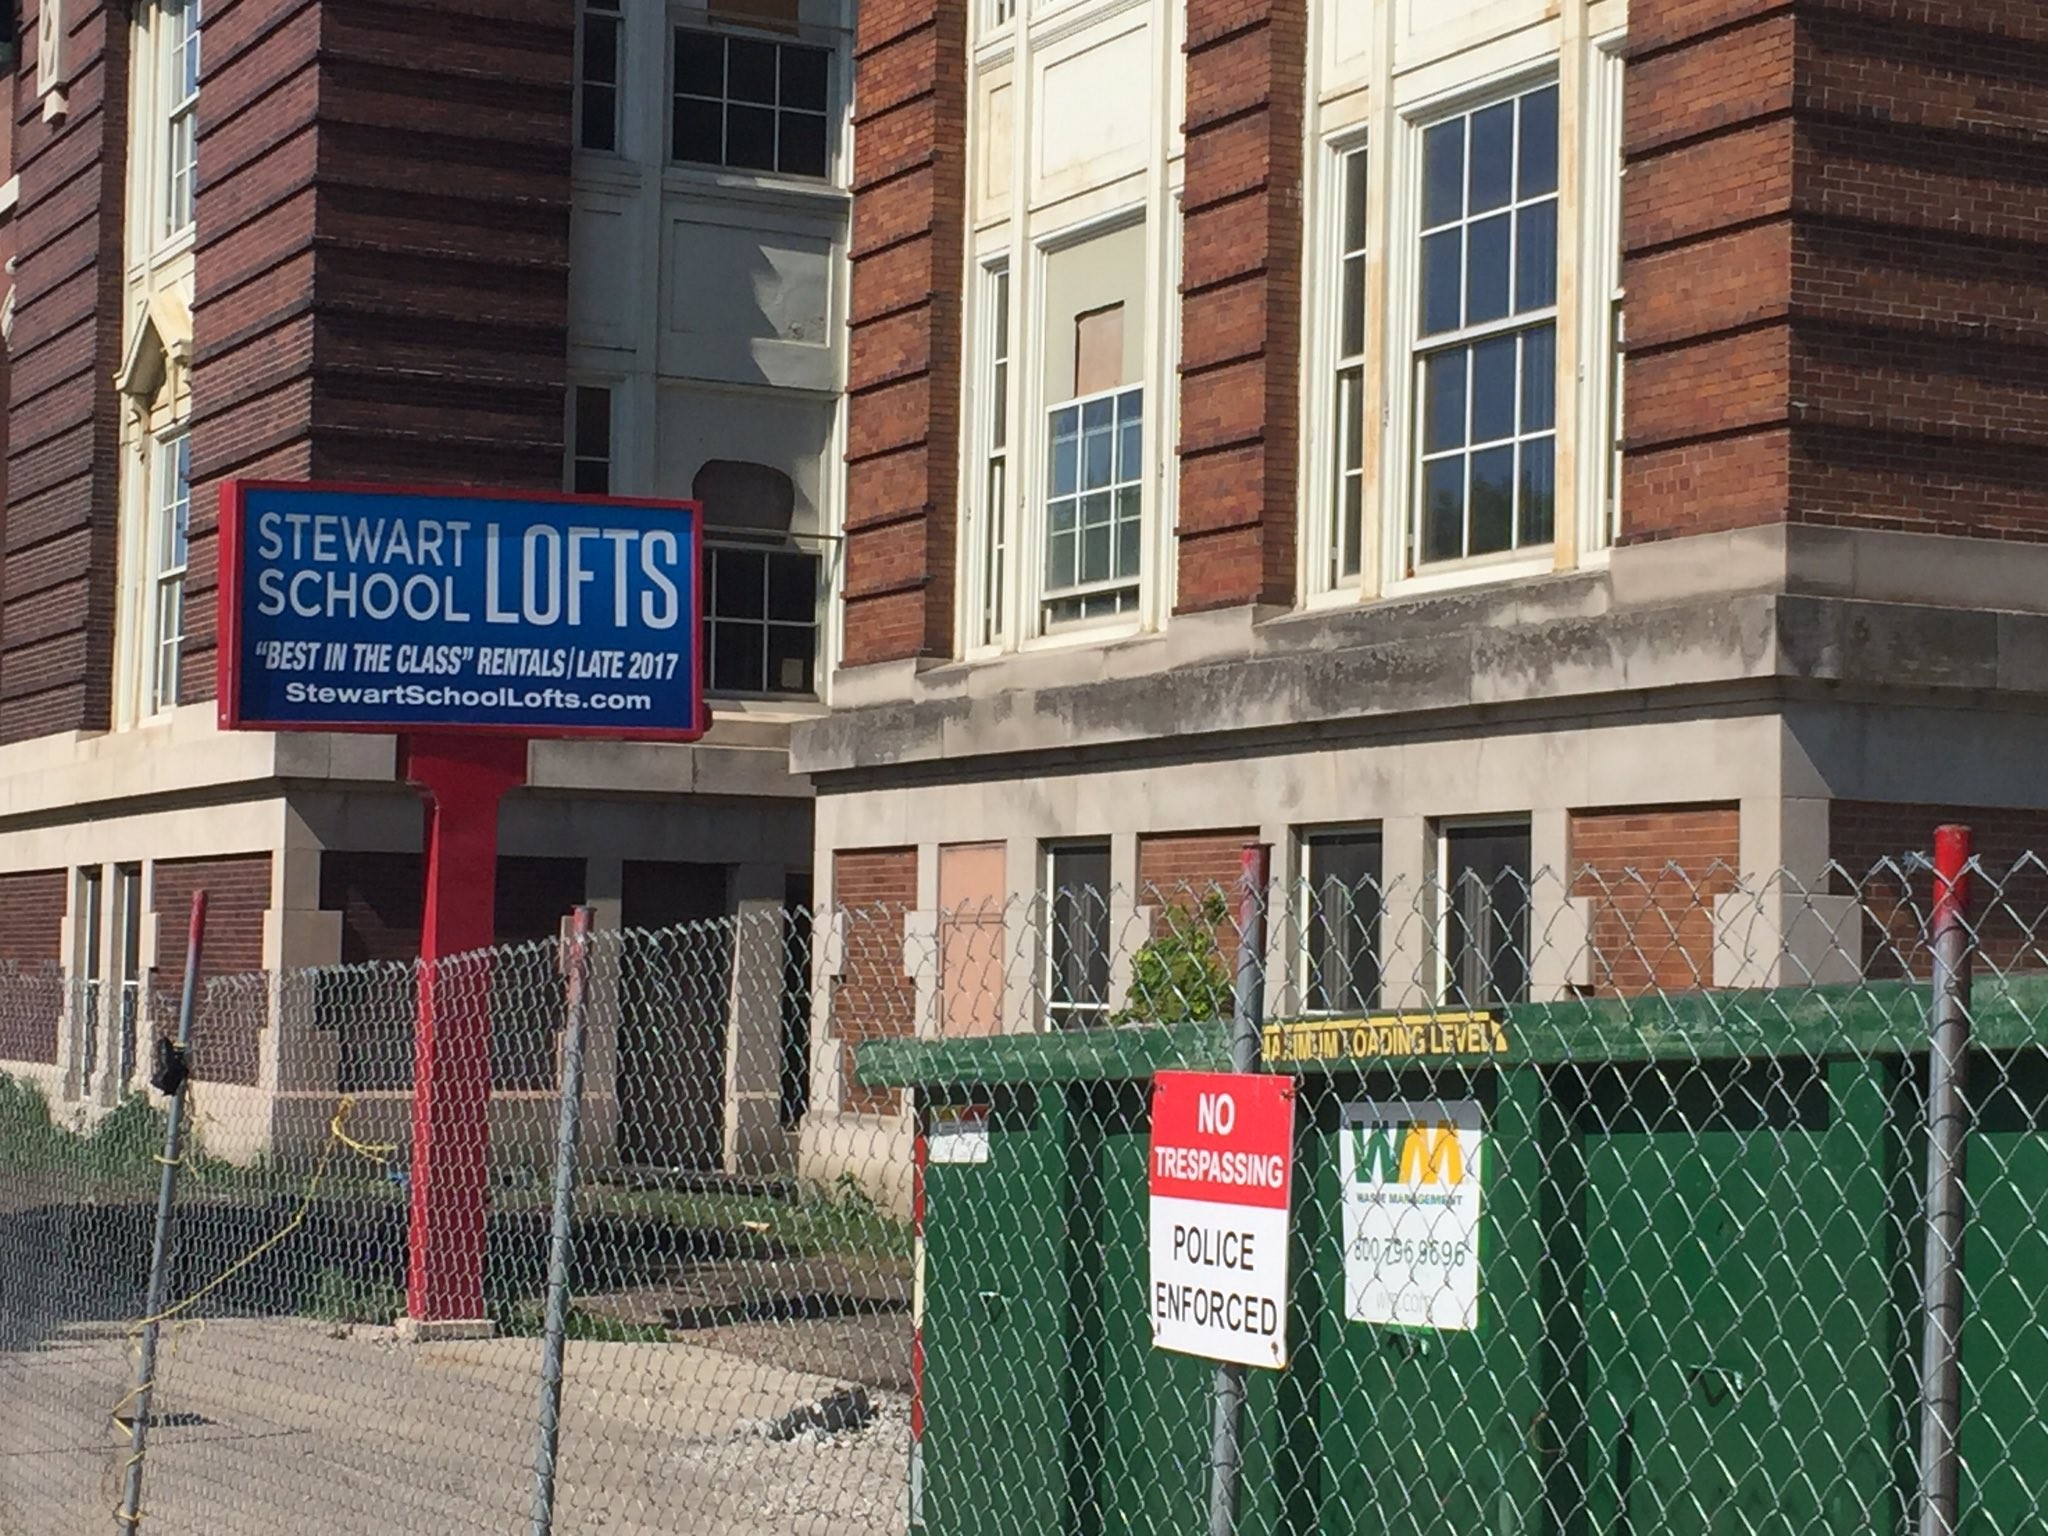 A Shuttered Chicago Public School Promoted As Best In The Class